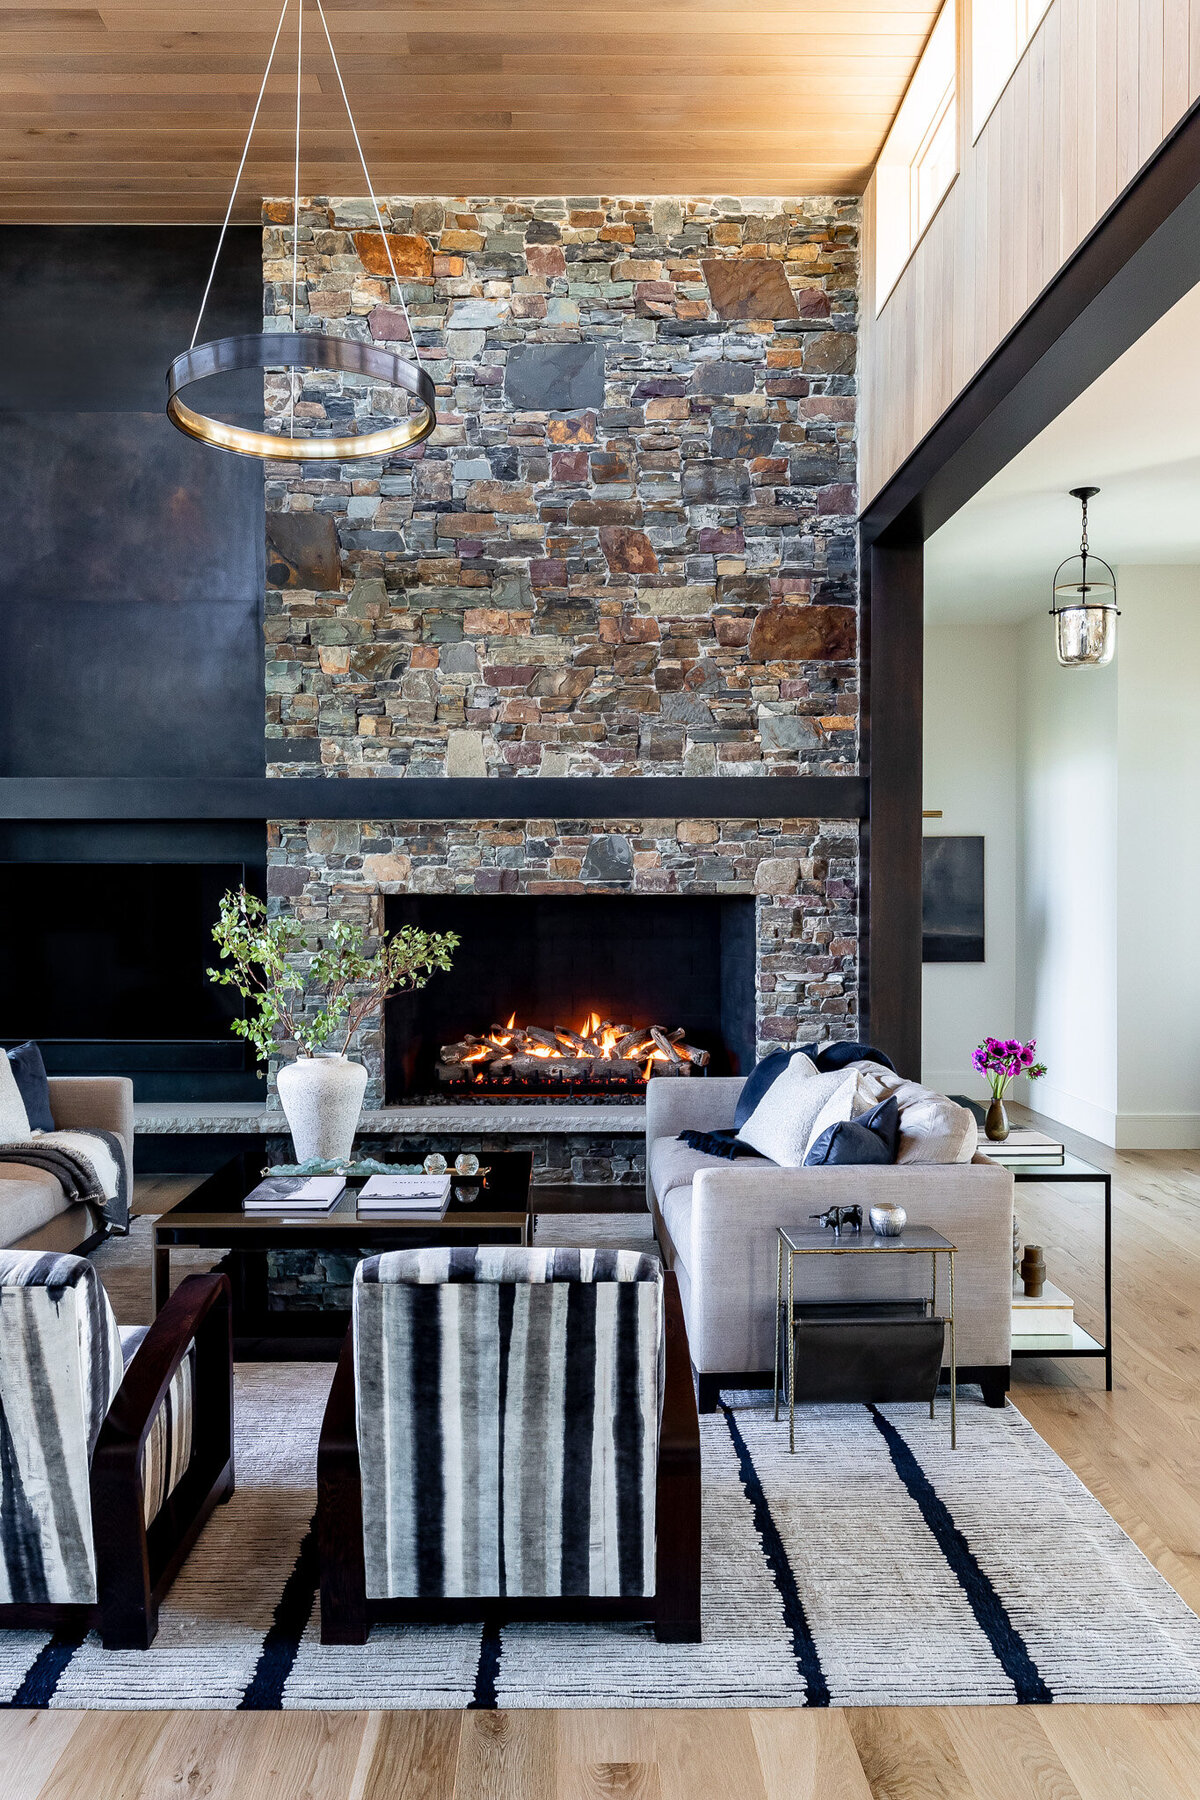 Carrie-Delany-Interiors-Promontory-Contemporary-Park-City-Utah-10